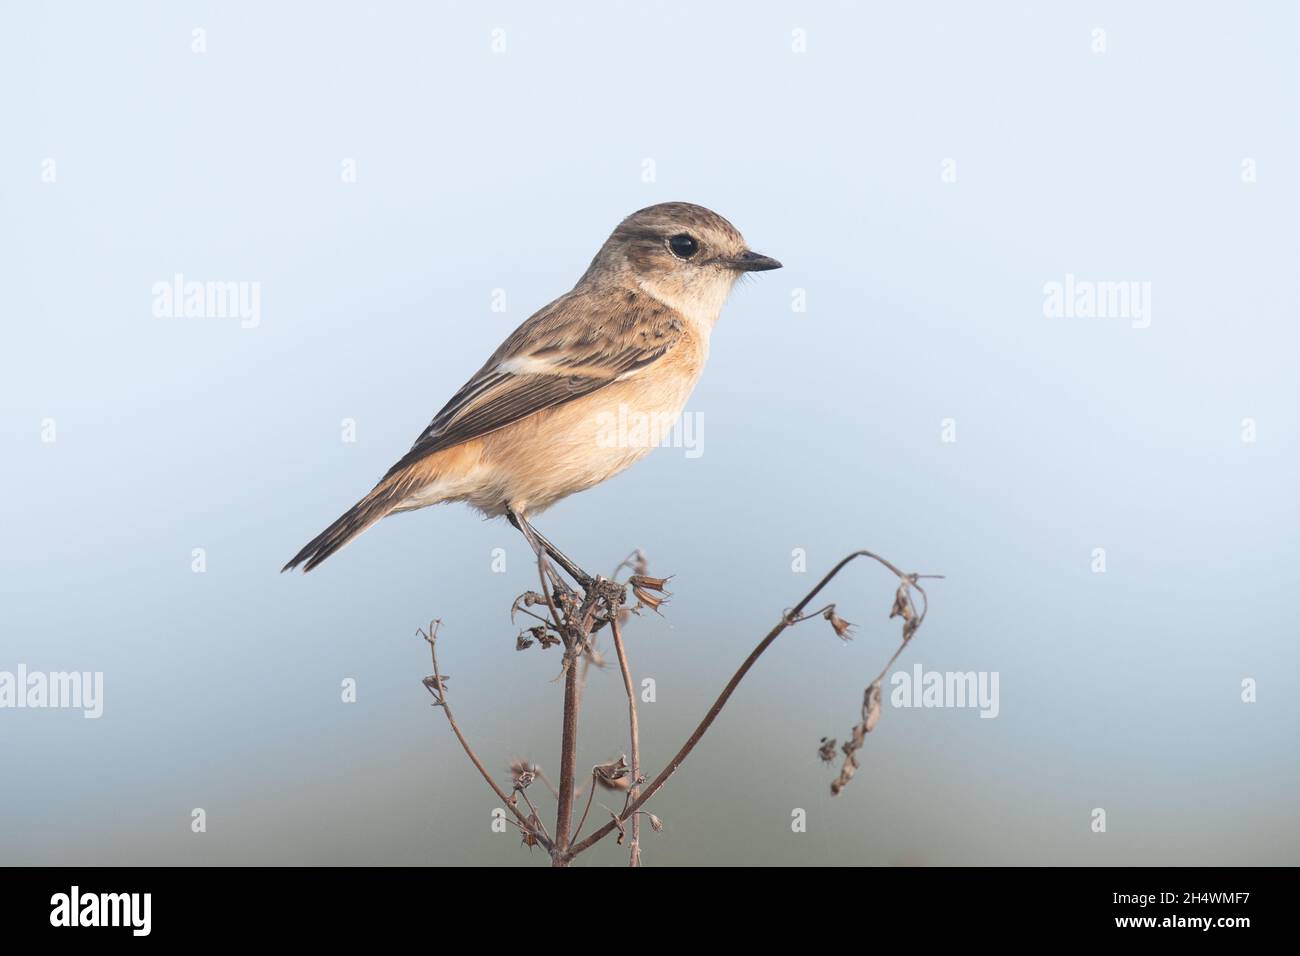 A chunky little bird found in a wide variety of open landscapes, often sitting on exposed perches. Stock Photo